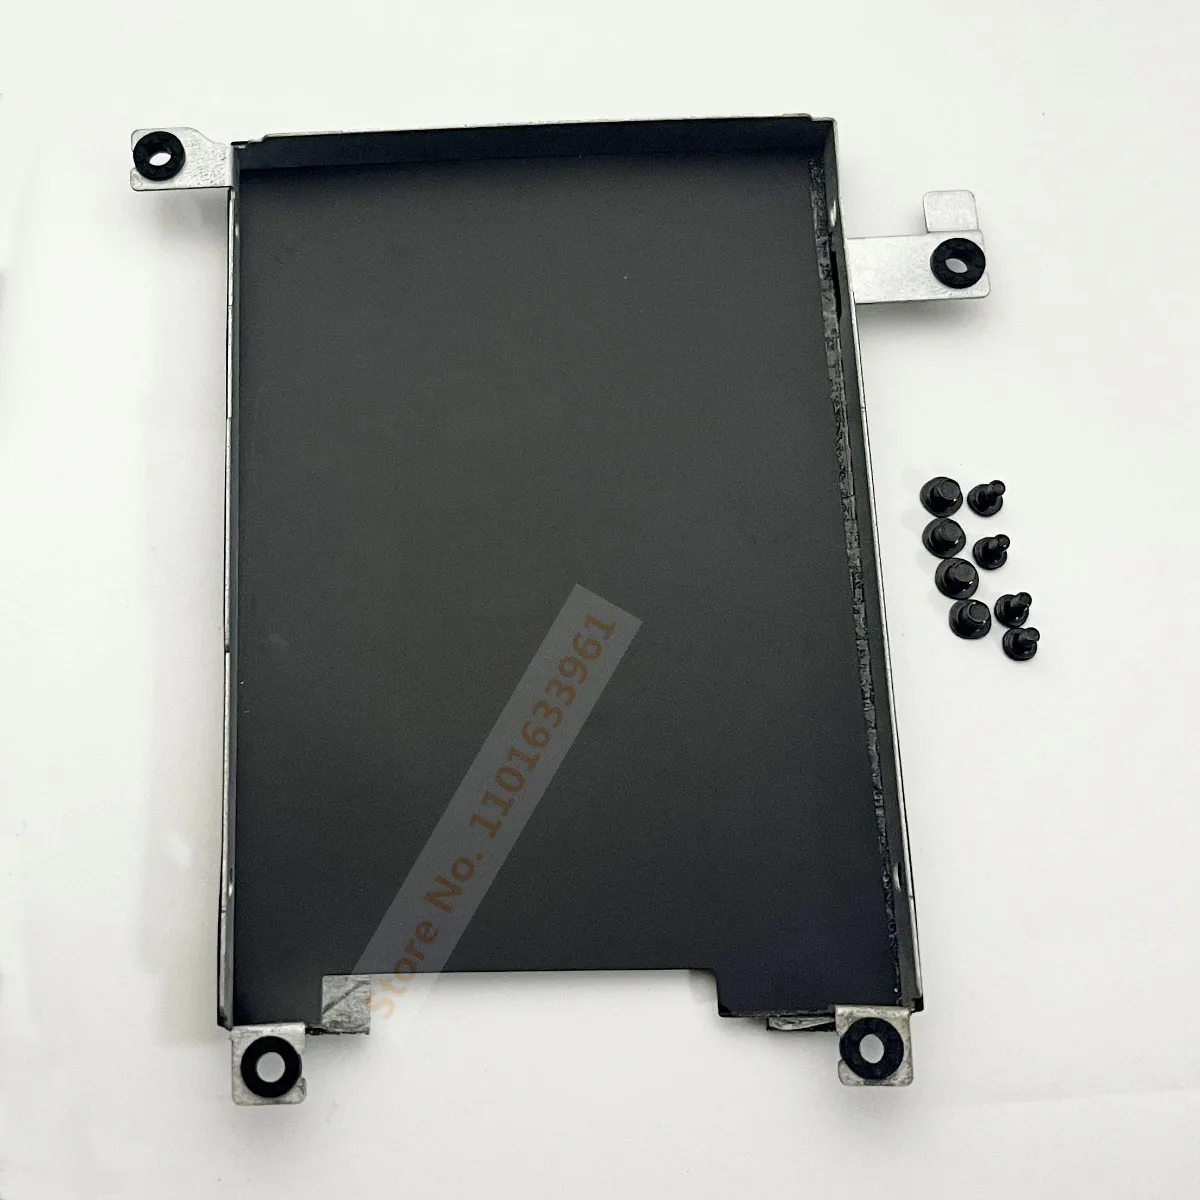 

2.5 Inch HDD SSD SATA Hard Disk Drive Caddy Frame Tray Bracket Cable for Dell Latitude 5510 5511 5500 5501 5502 5505 ND8N9 XY5F7